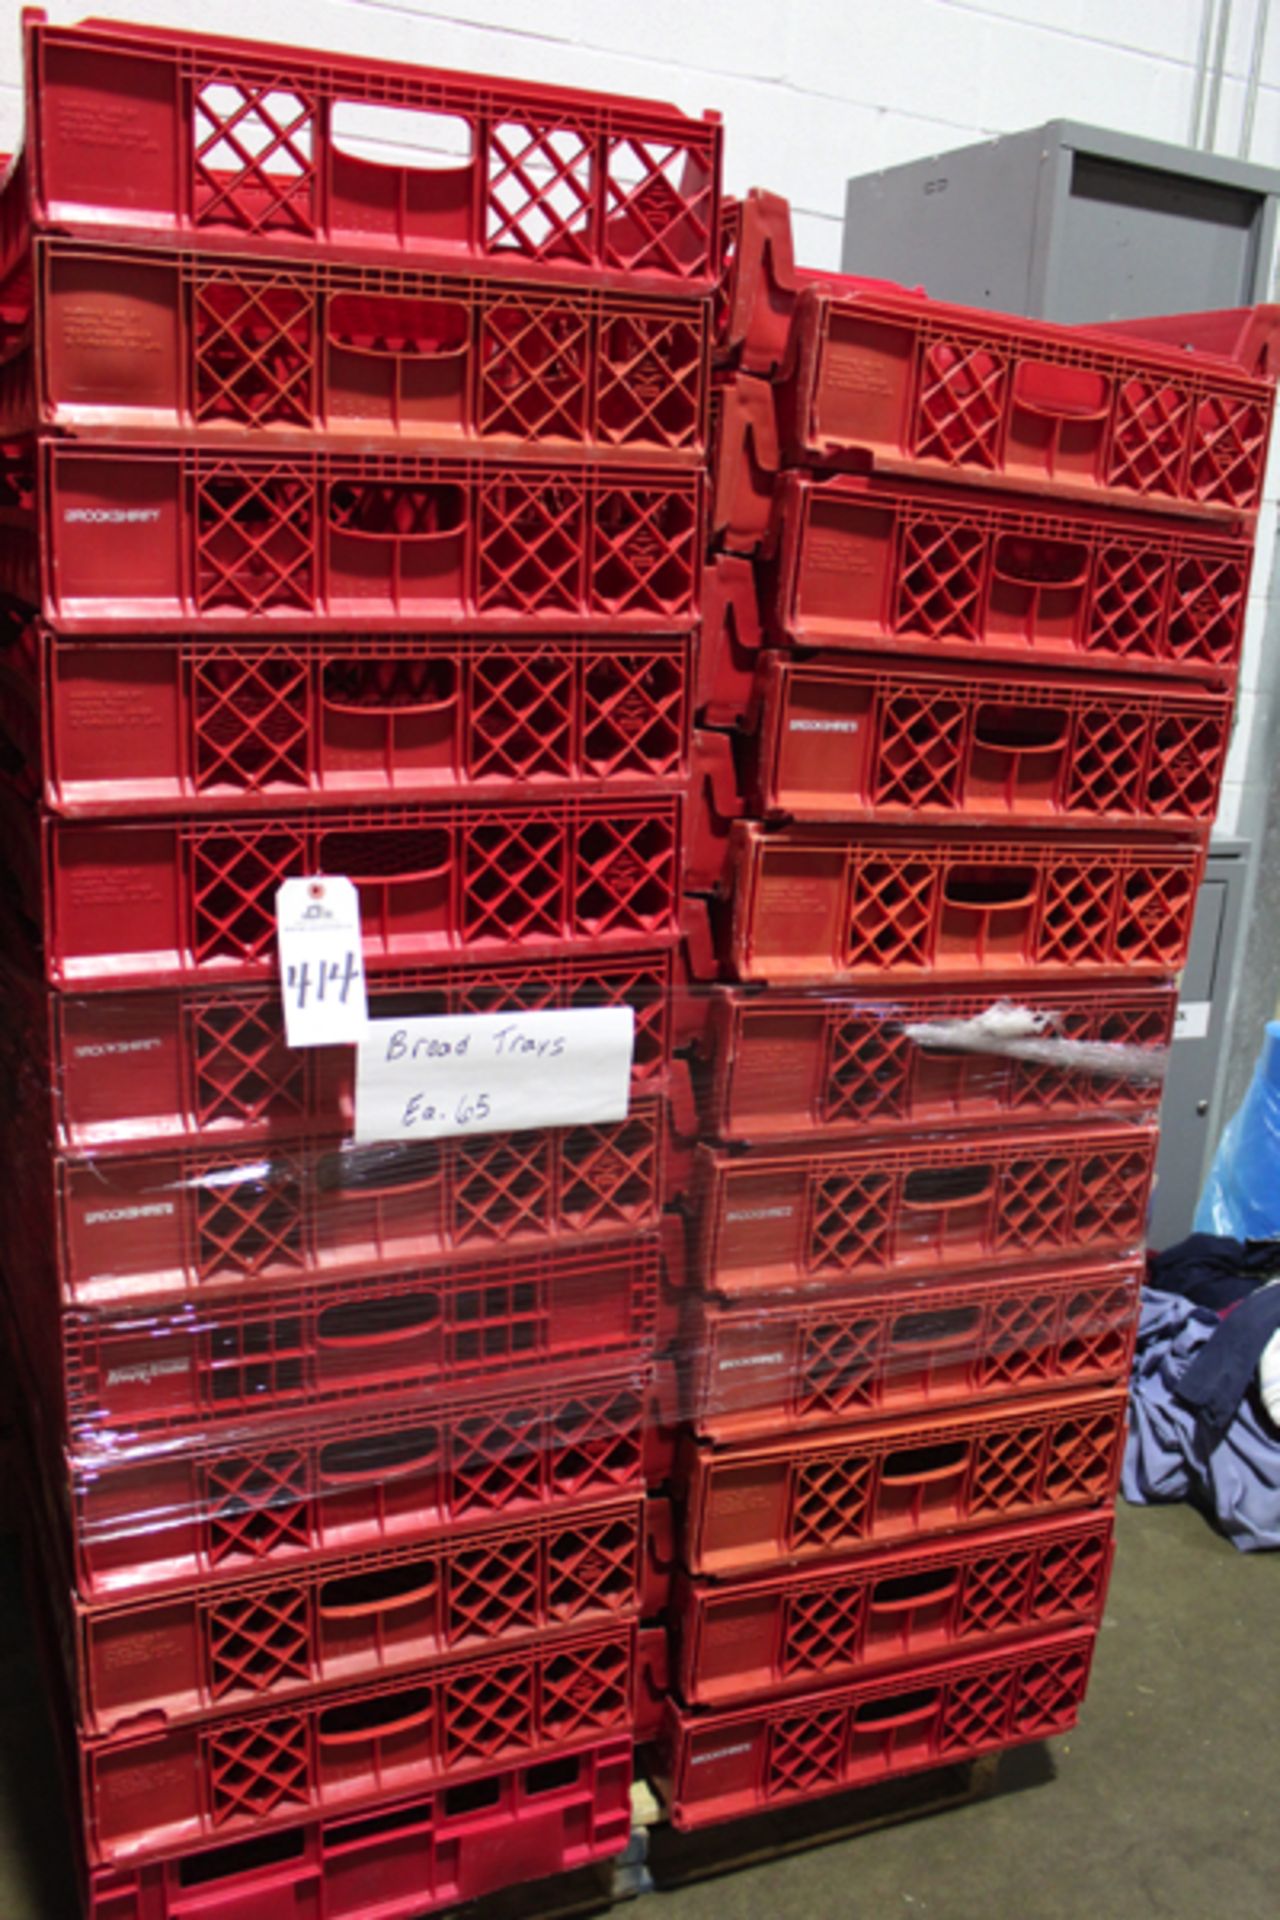 Lot of (65) Bread Trays, 20 1/2" x 24 3/4" x 5 1/4" | Loading Price: $25 Or Buyer May Hand Carry